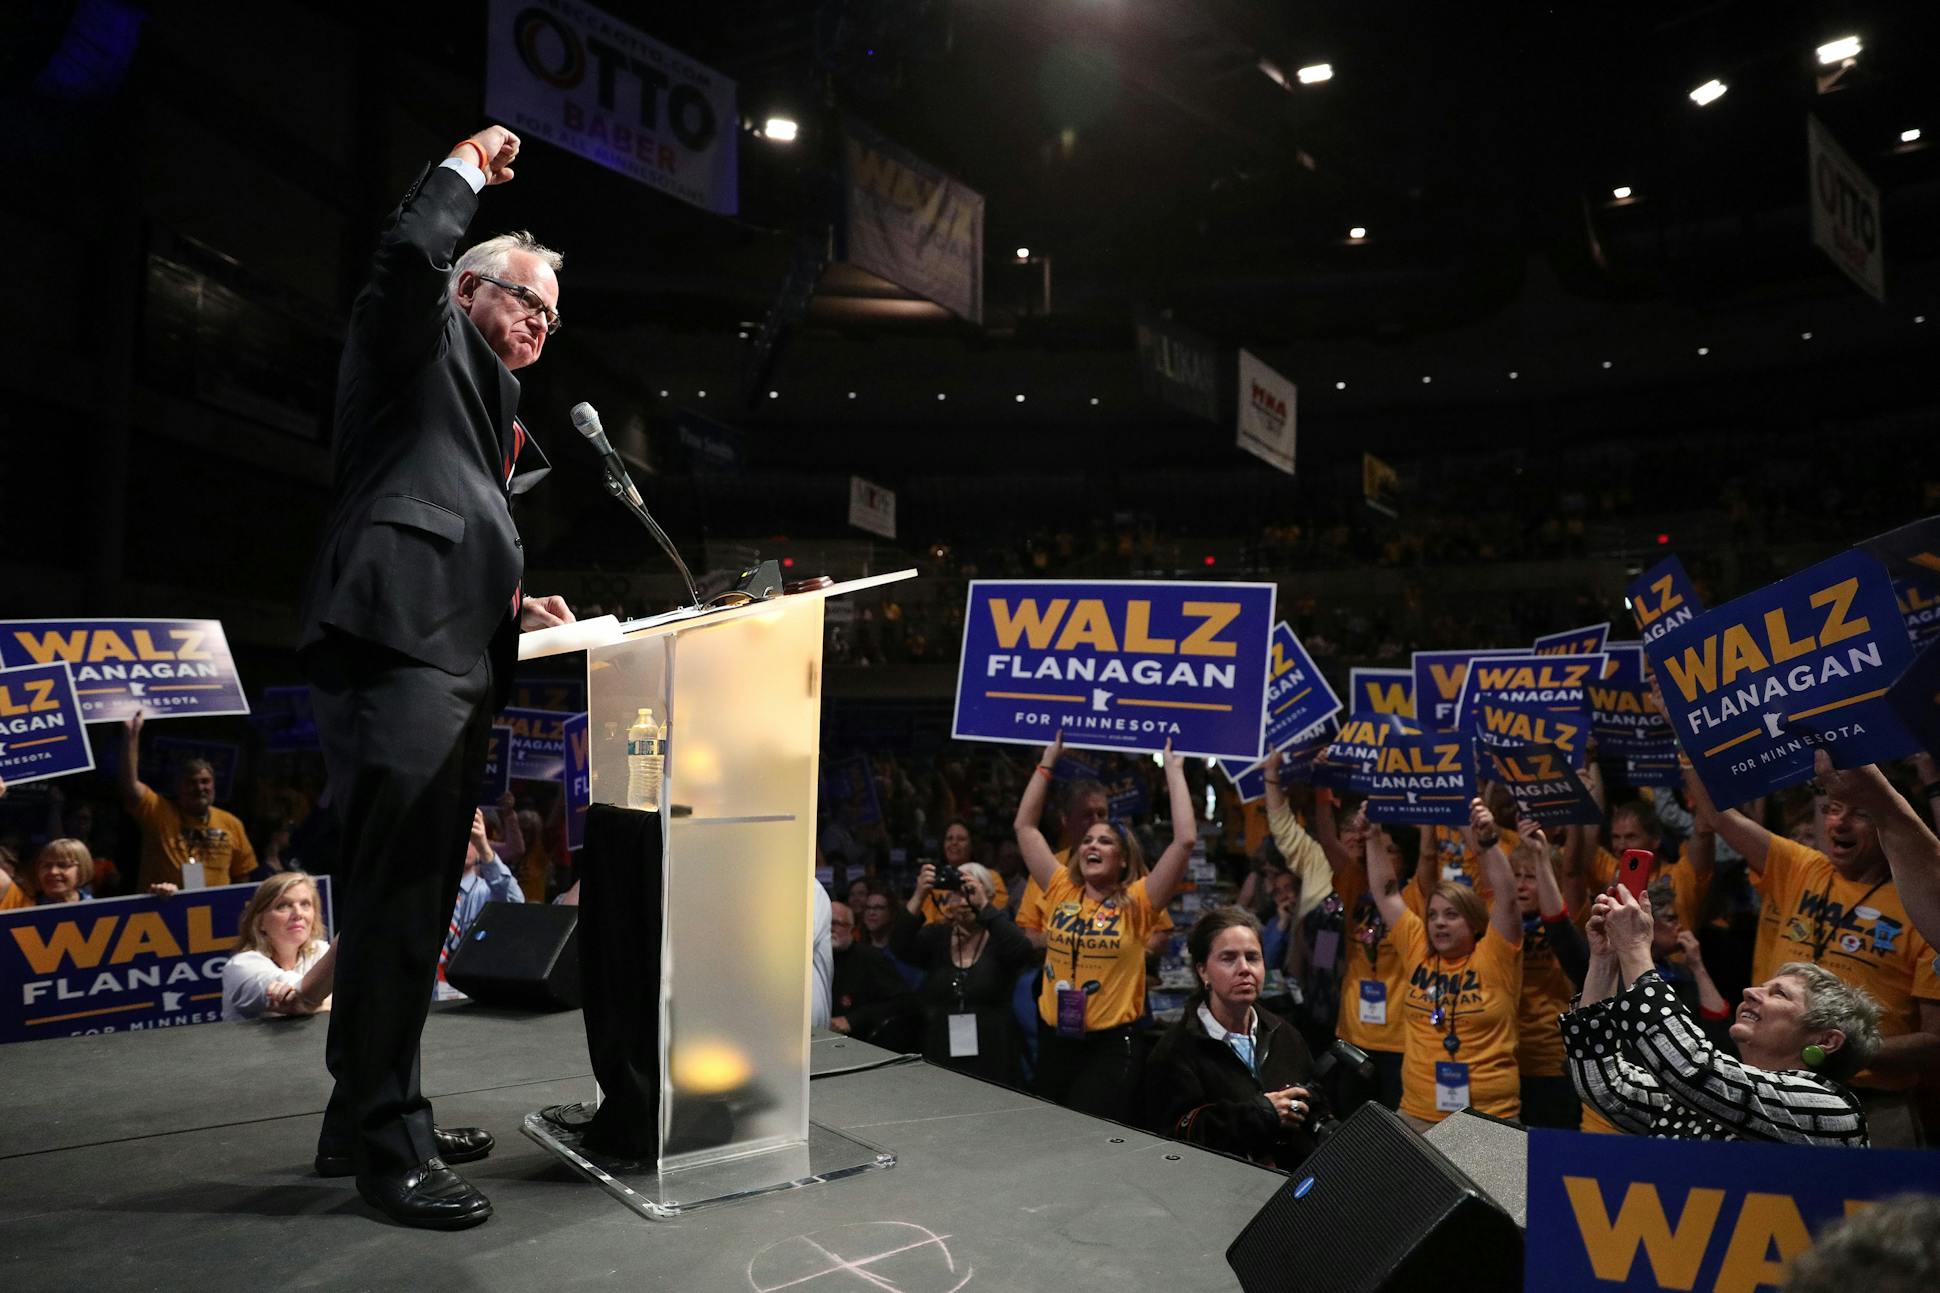 Walz pumped his fist as he took the stage to speak at the DFL State Convention.